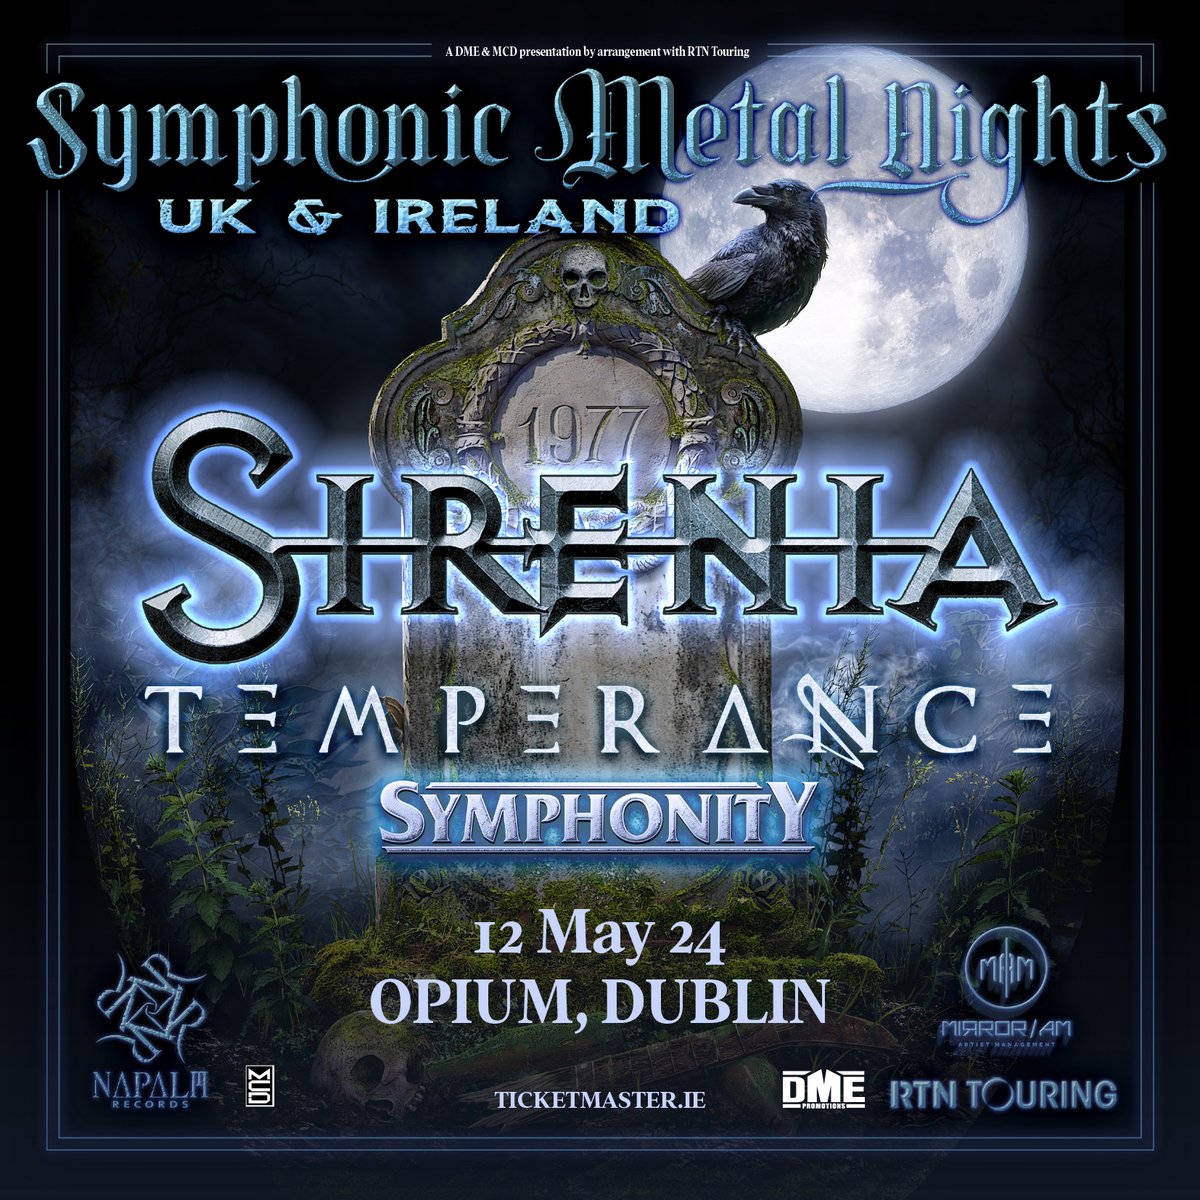 🚨 THIS DAY WEEK 🚨 @sireniaband w/Temperance @ Symphonity at @OpiumLiveDublin Tickets still available from Ticketmaster and venue. Times (subject to change): Doors 7 Symphonity 7.10 Temperance 8.00 Sirenia 9.20